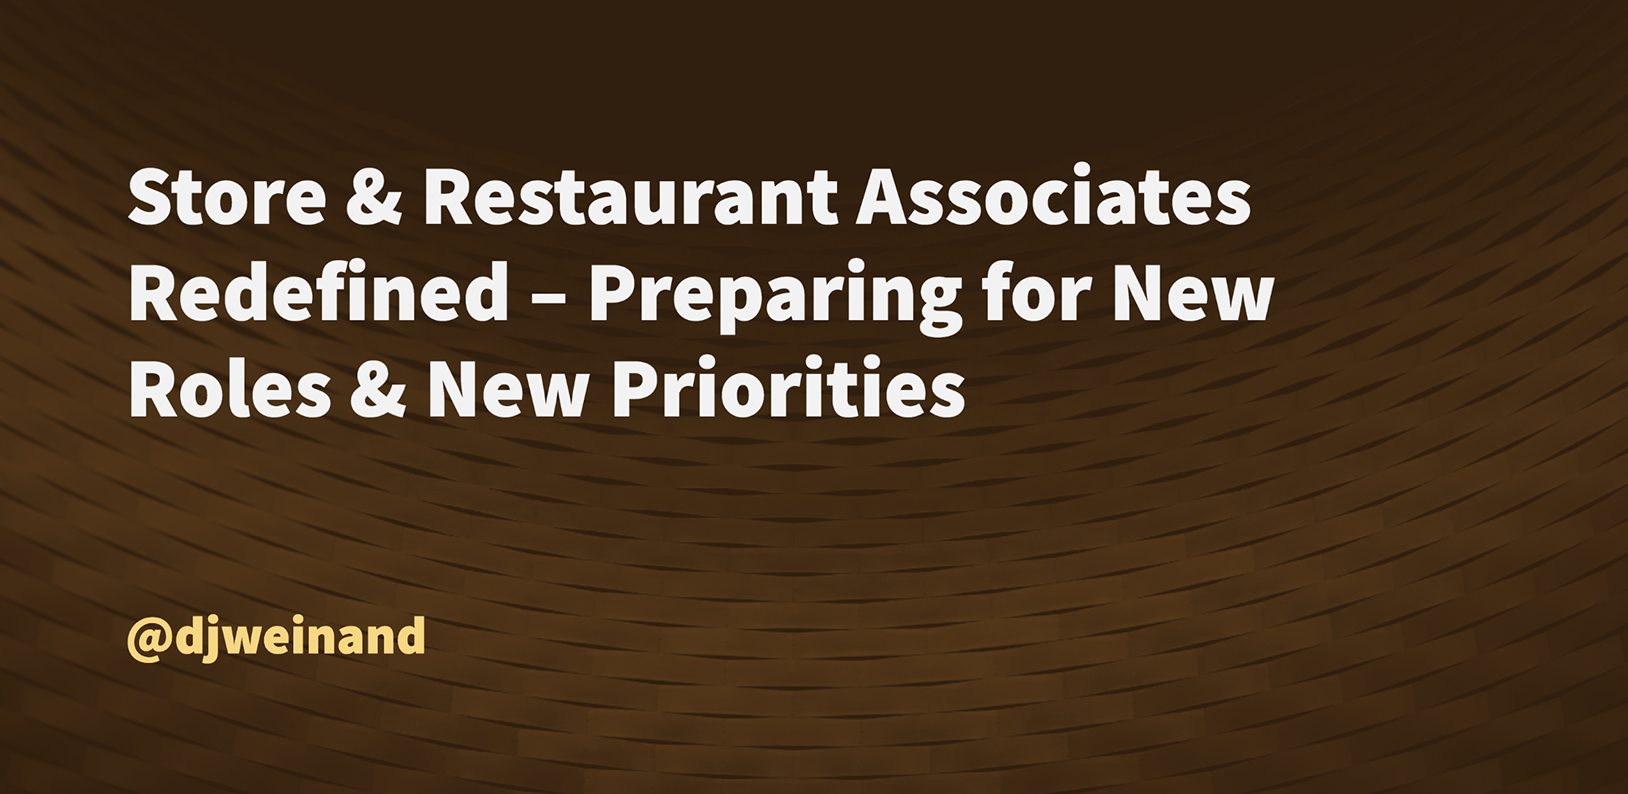 Store & Restaurant Associates Redefined – Preparing for New Roles & New Priorities